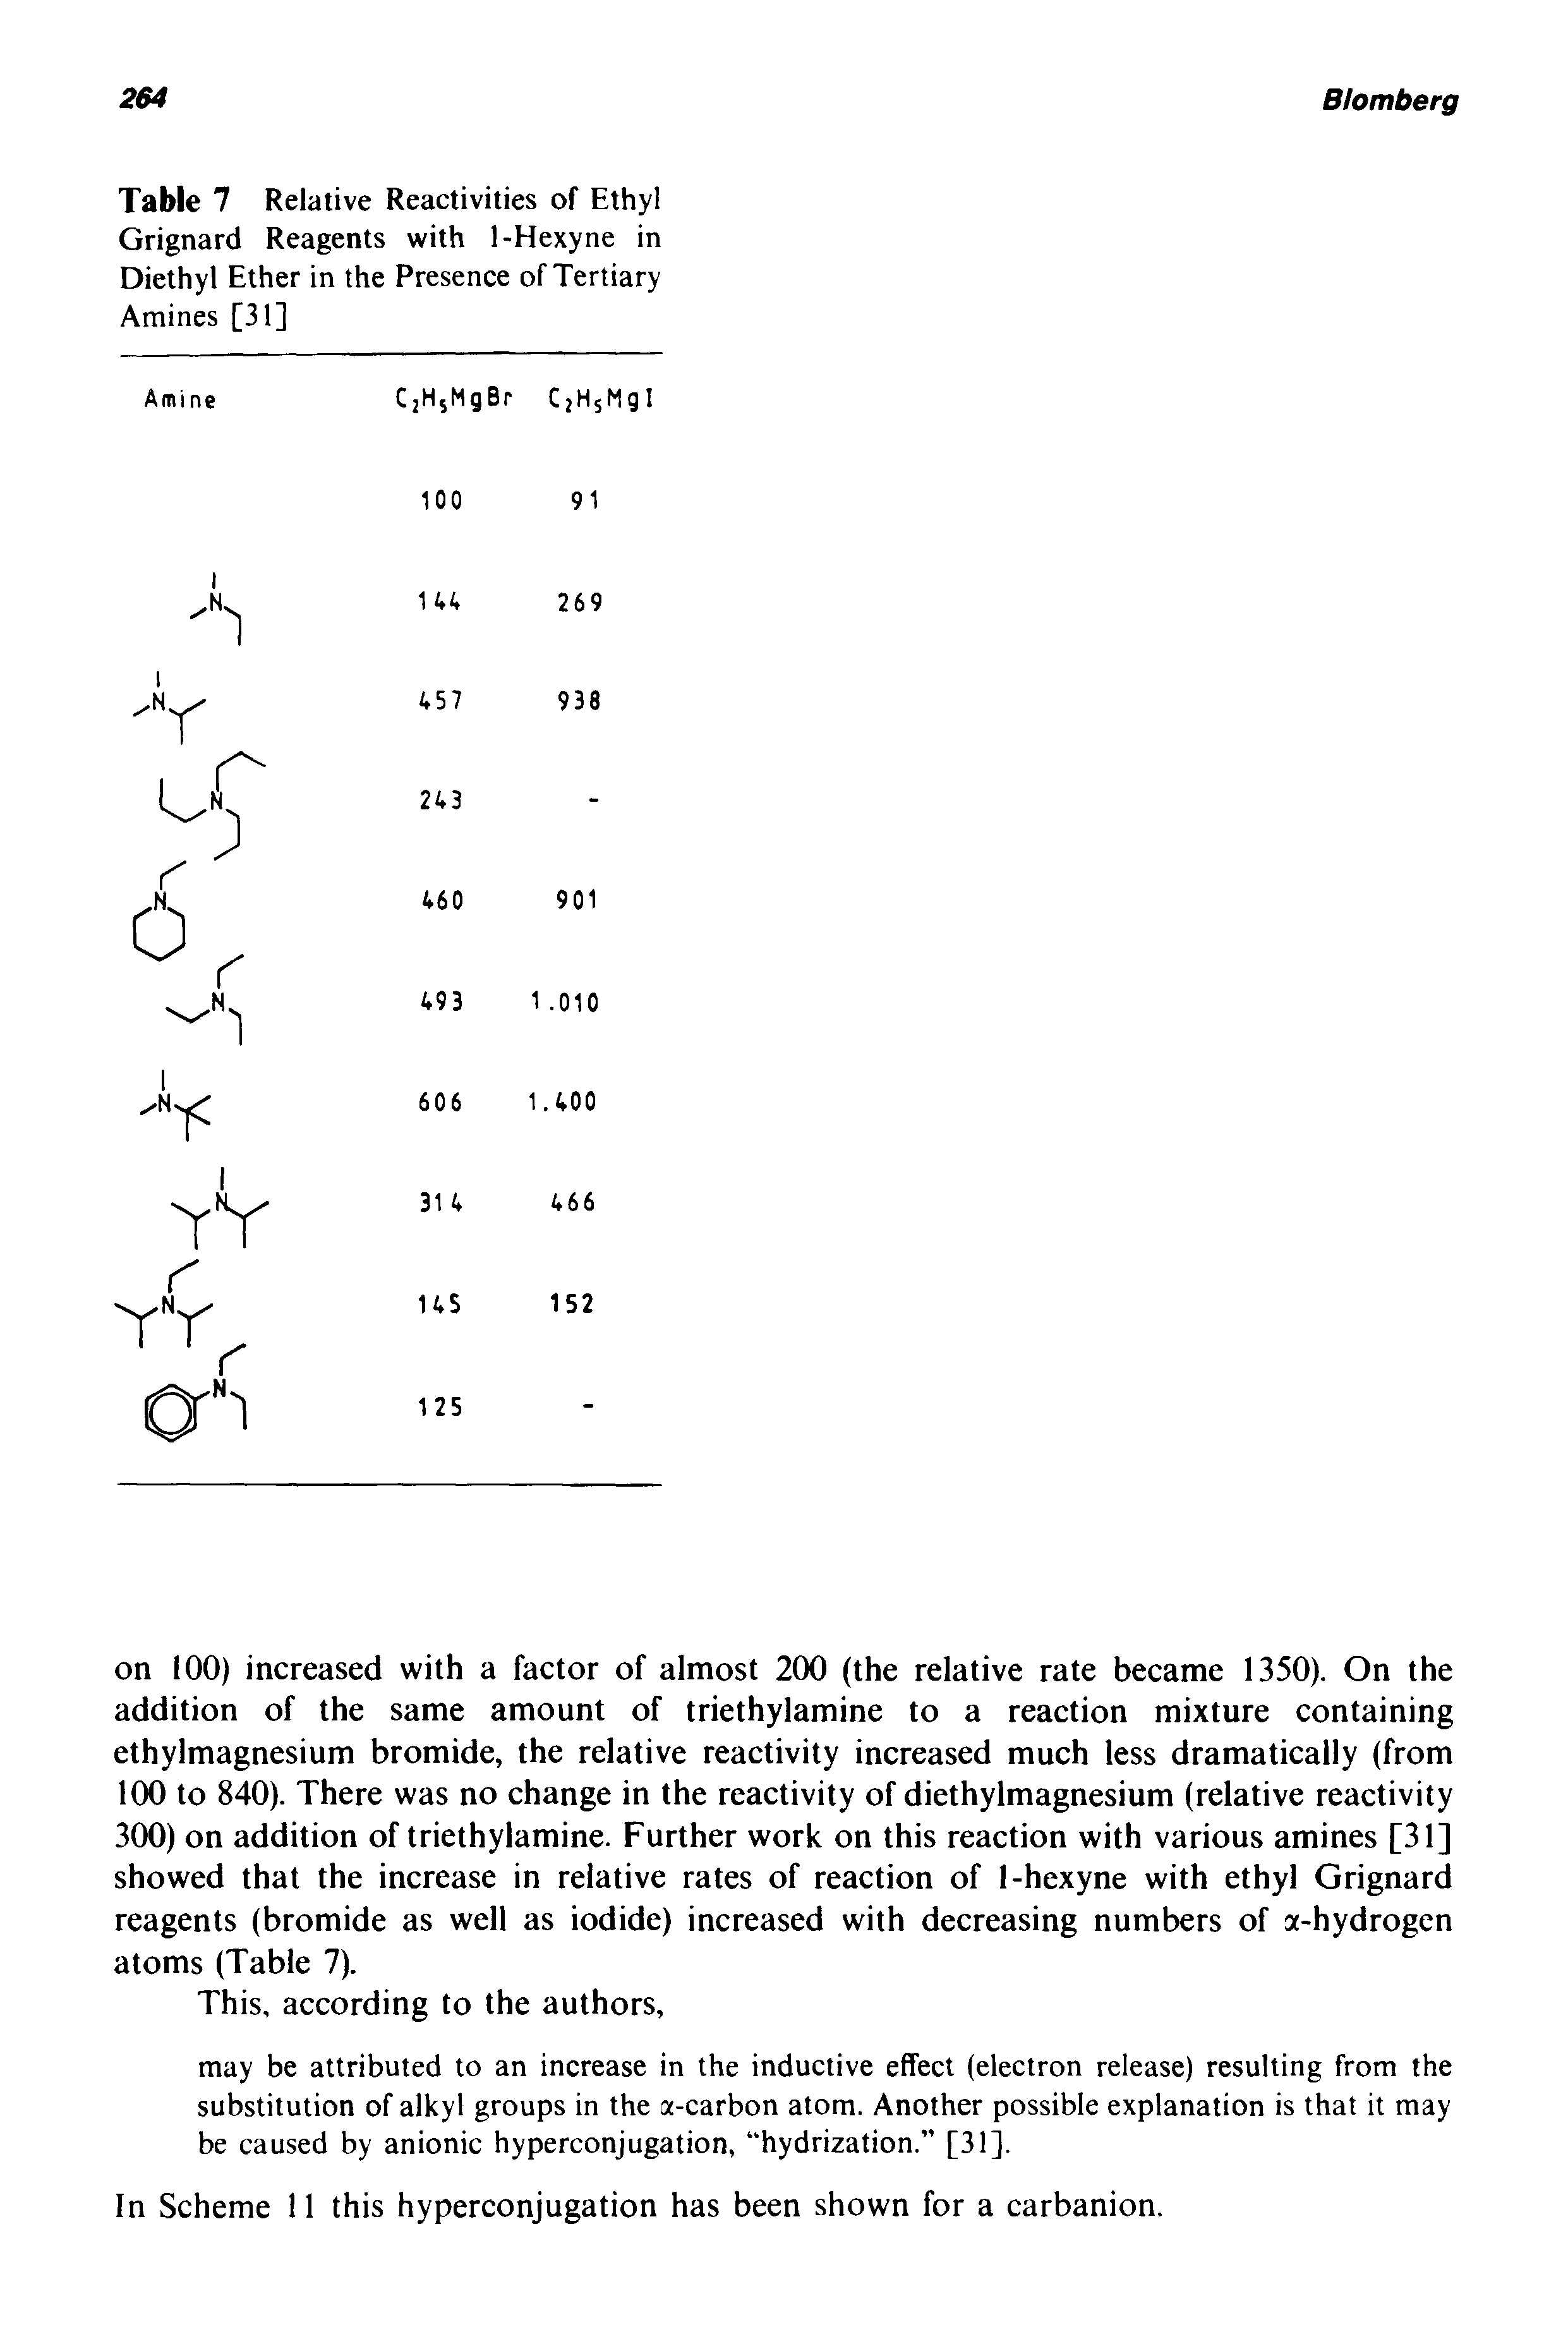 Table 7 Relative Reactivities of Ethyl Grignard Reagents with 1-Hexyne in Diethyl Ether in the Presence of Tertiary Amines [31]...